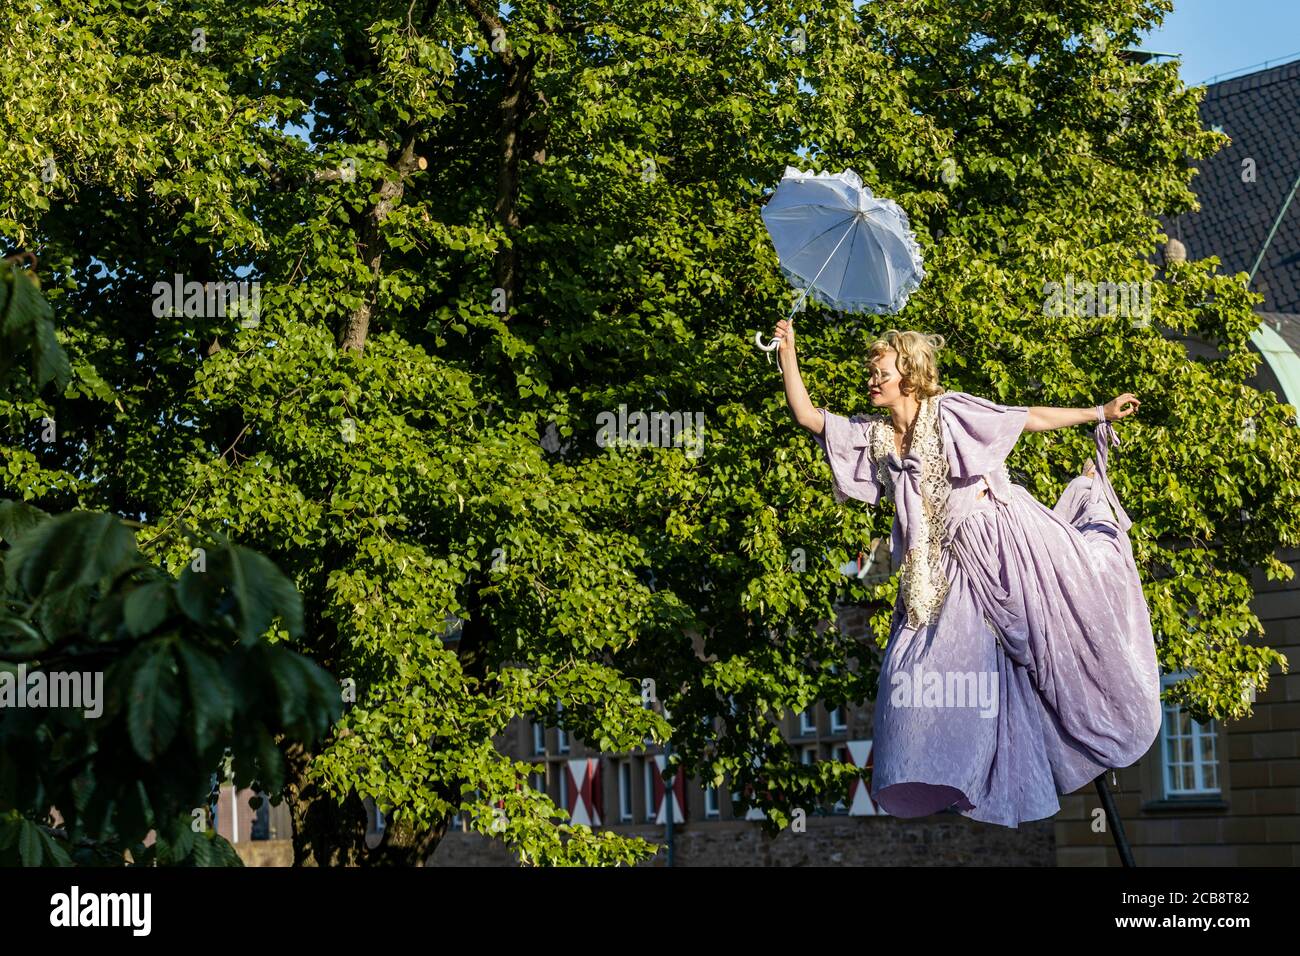 Mülheim an der Ruhr, Germany. 7 August 2020. Broicher Schlossnacht 2020 on 7 and 8 August takes place with a social distancing concept because of coronavirus / Covid-19. Acrobatics performed by 'Flying Luise' on a 5m tall pole. Stock Photo